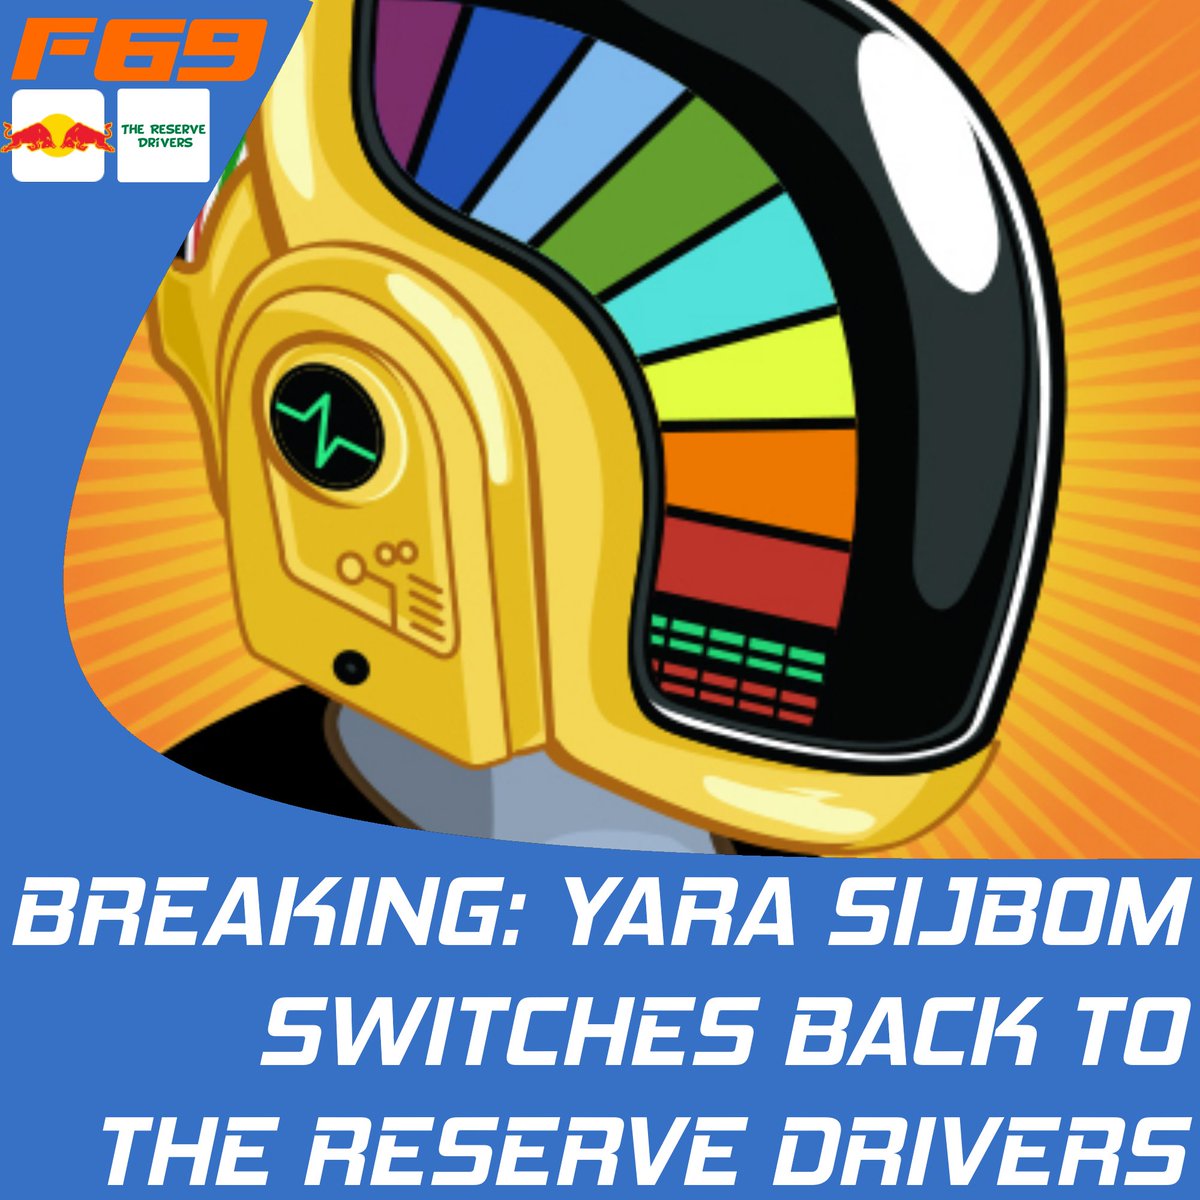 BREAKING: @Yara_Sijbom SWITCHES BACK TO THE RESERVE DRIVERS!

The 🇳🇱 Dutch driver will team up with former and now teammate @janniekm00 at his old team.

#Formula69 #F69 #Formula1 #F1 #F12023 #F123 #F123game #racing #simracing #esports #F1esports #F1league #TheReserveDrivers